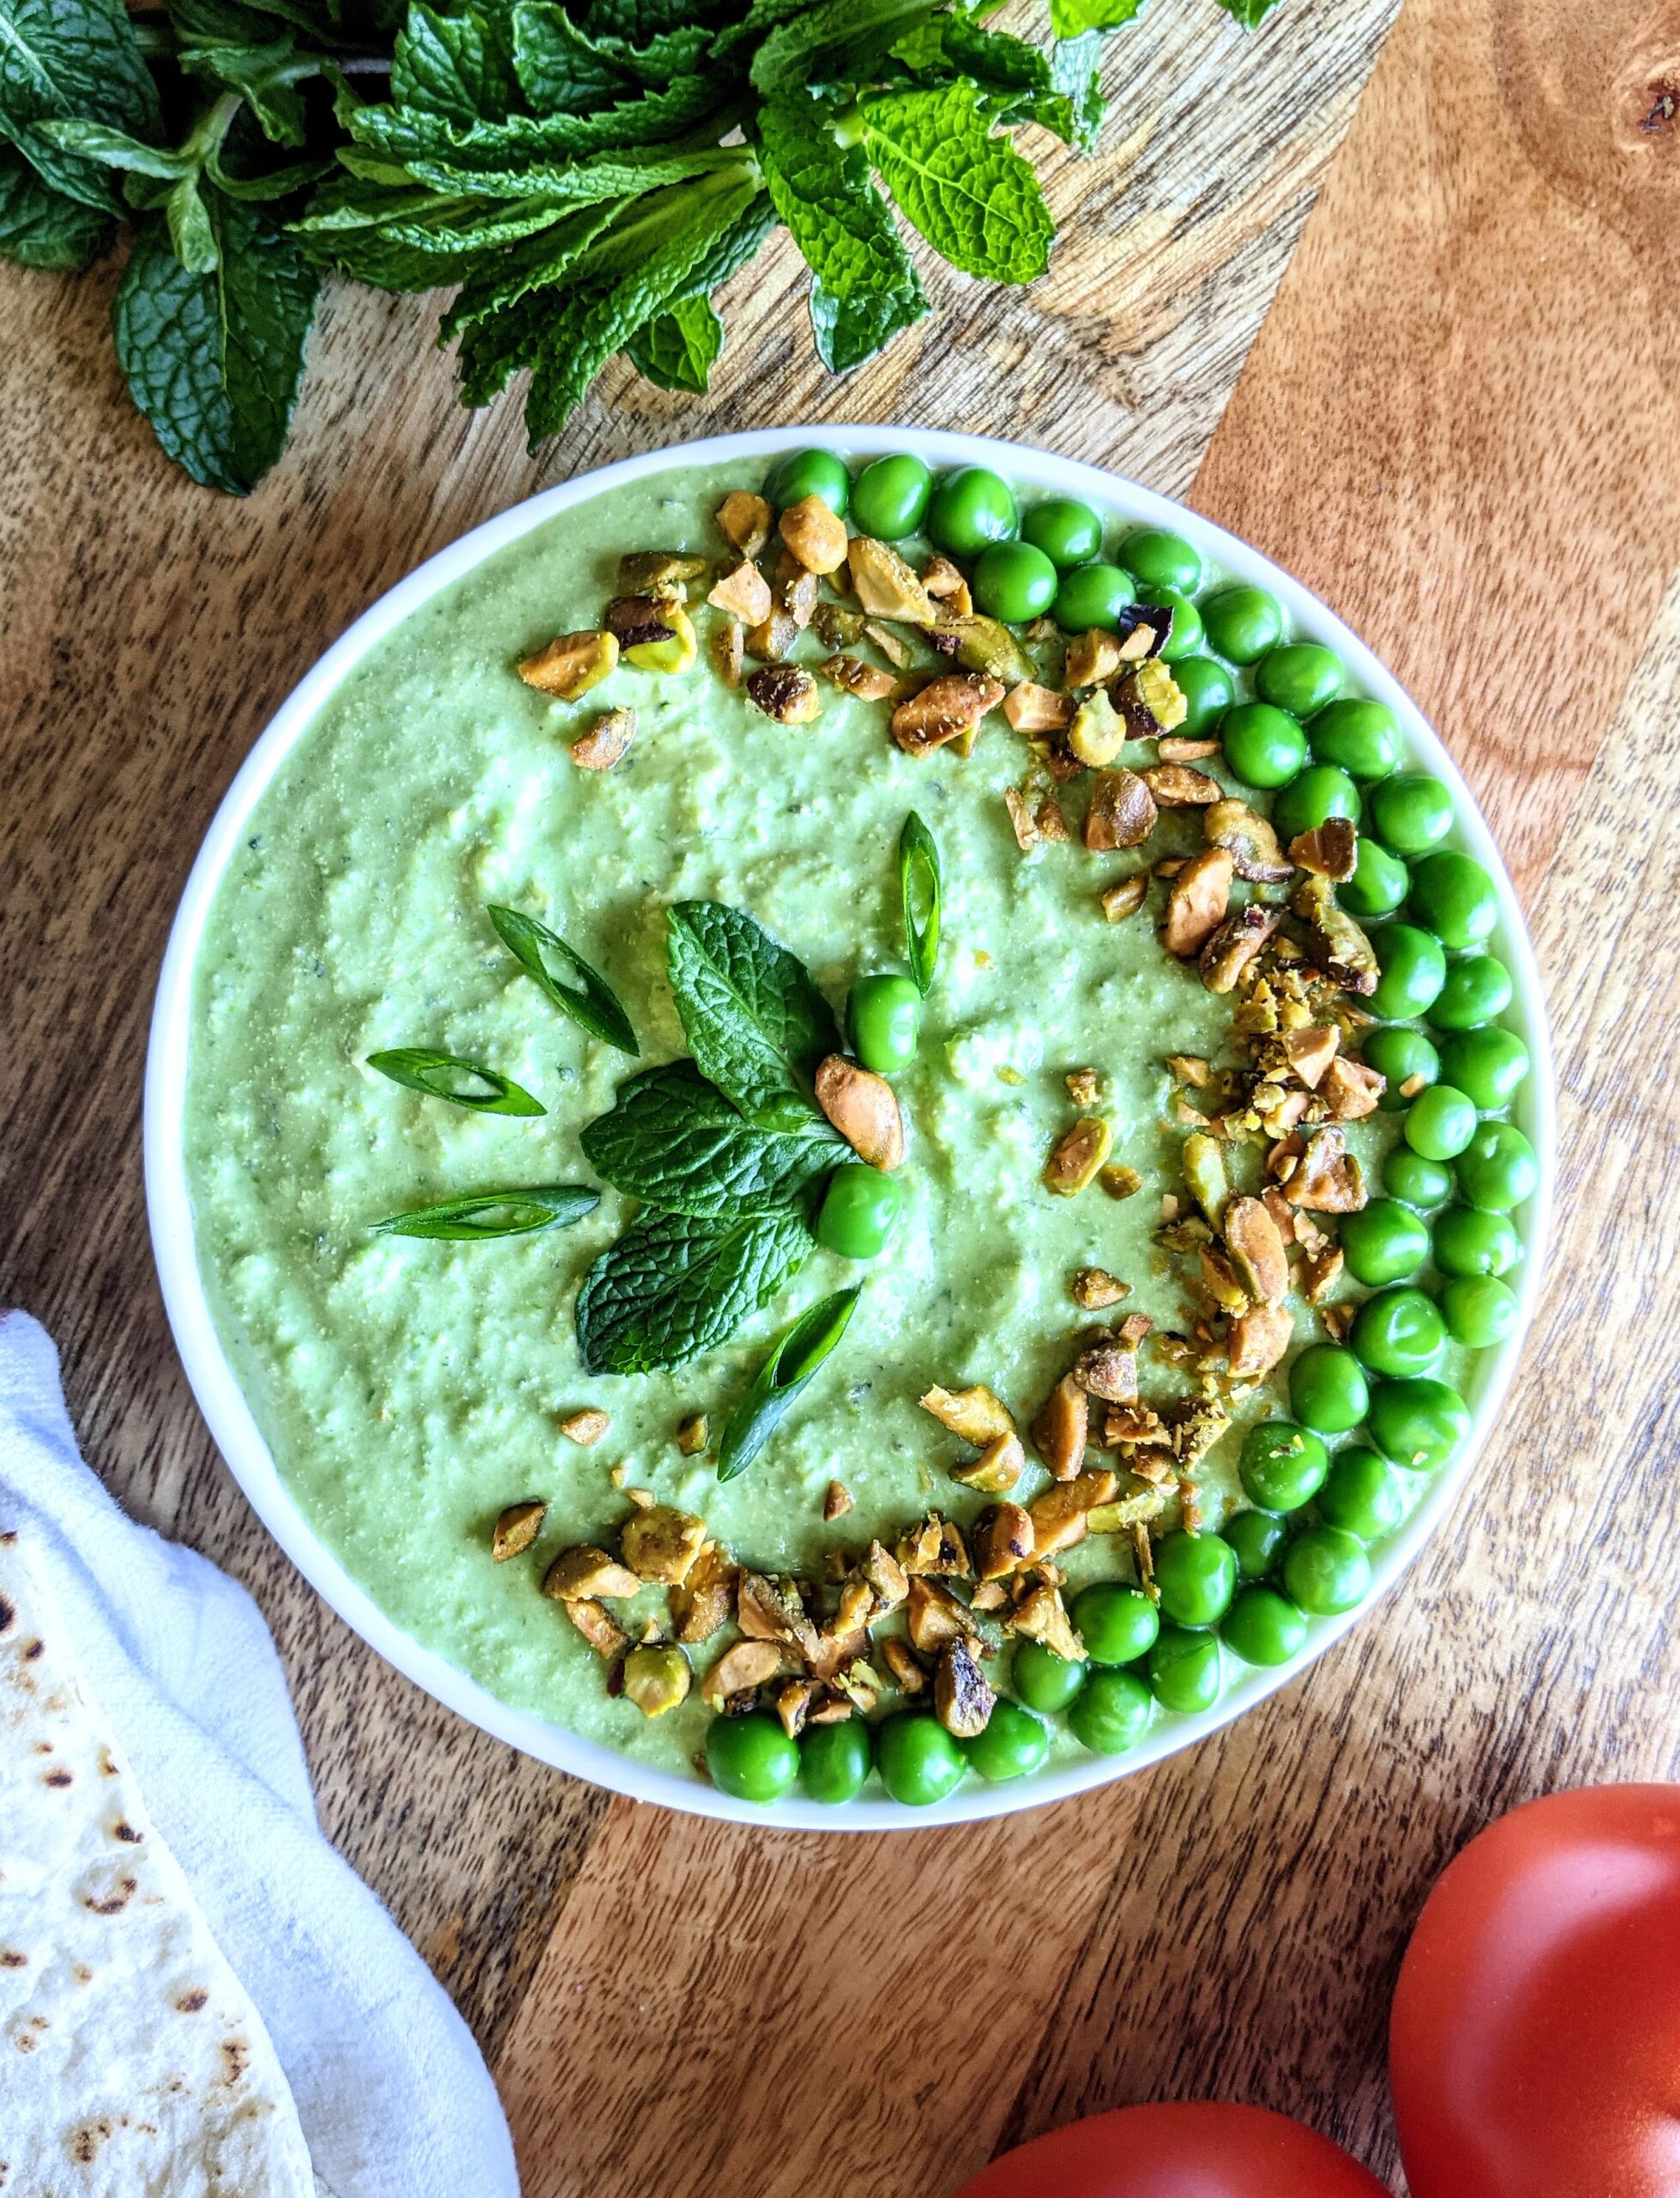 A bright green dip make of sweet spring peas and salty feta. Garnished with chopped roasted pistachios and whole steamed peas arranged in the shape of a crescent moon, and a few leaves of fresh mint.